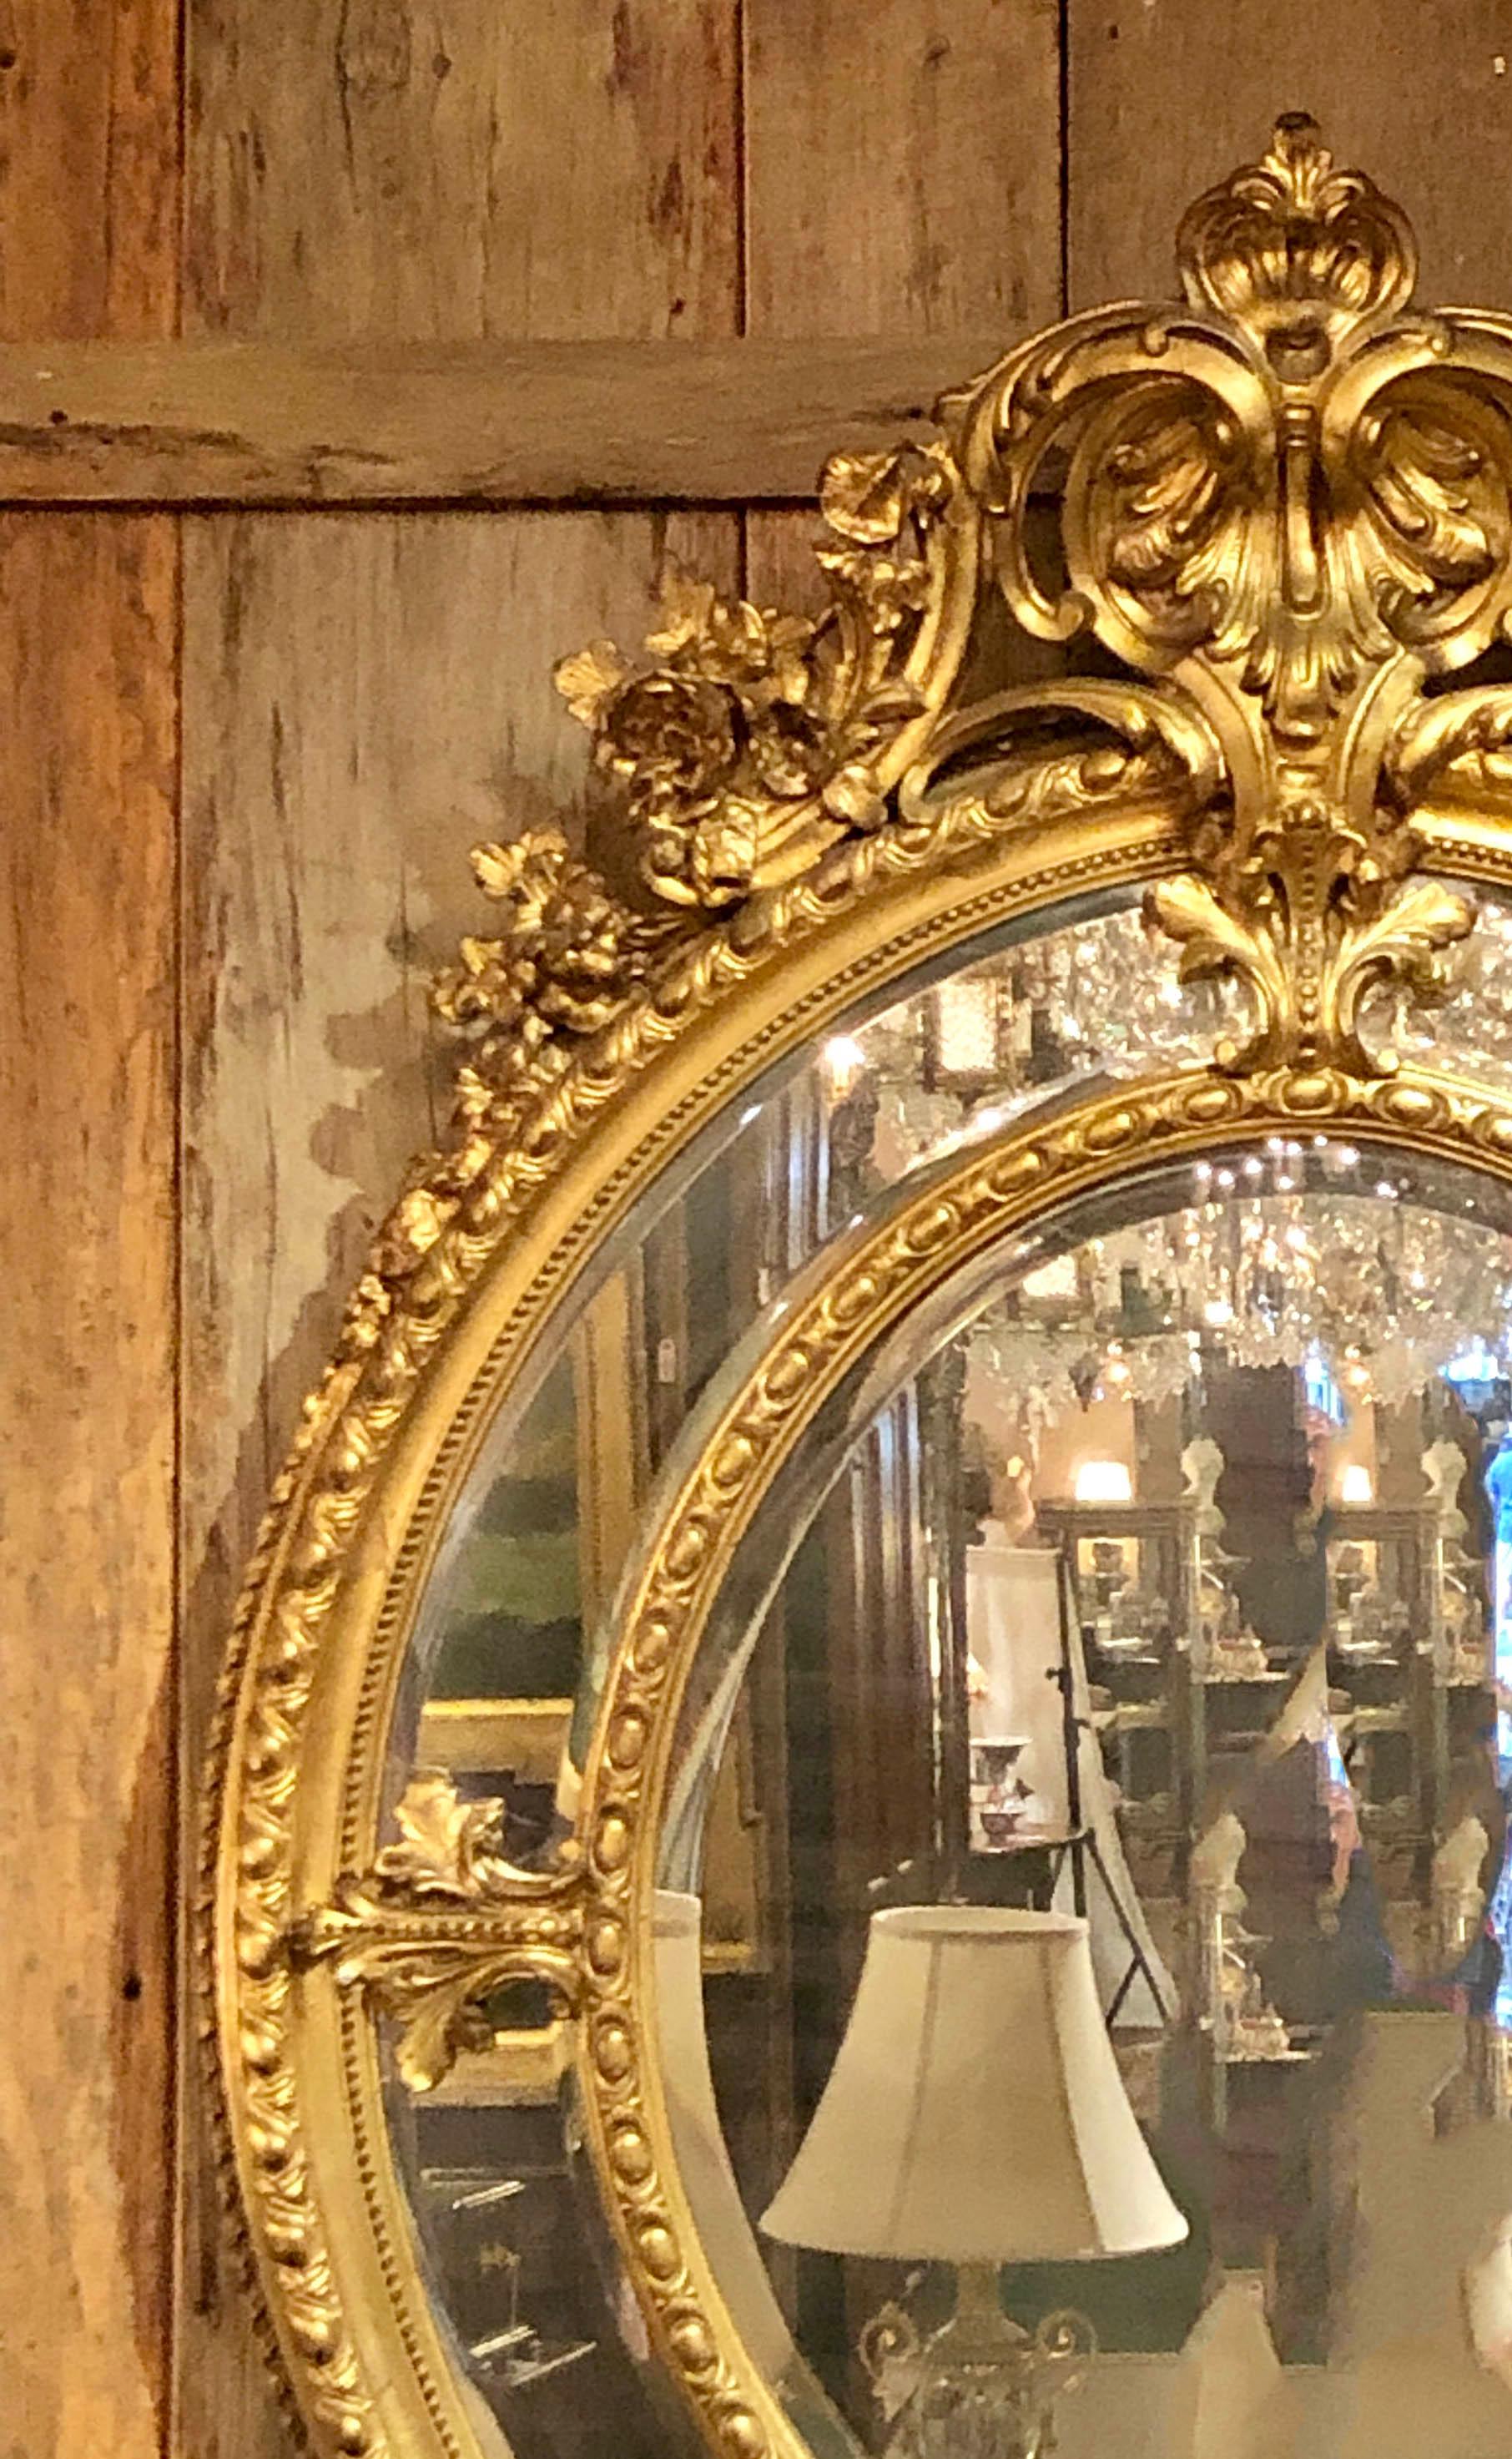 Large Antique French Finely Carved Gilt Wood Oval Mirror with Beveling, circa 1870-1890